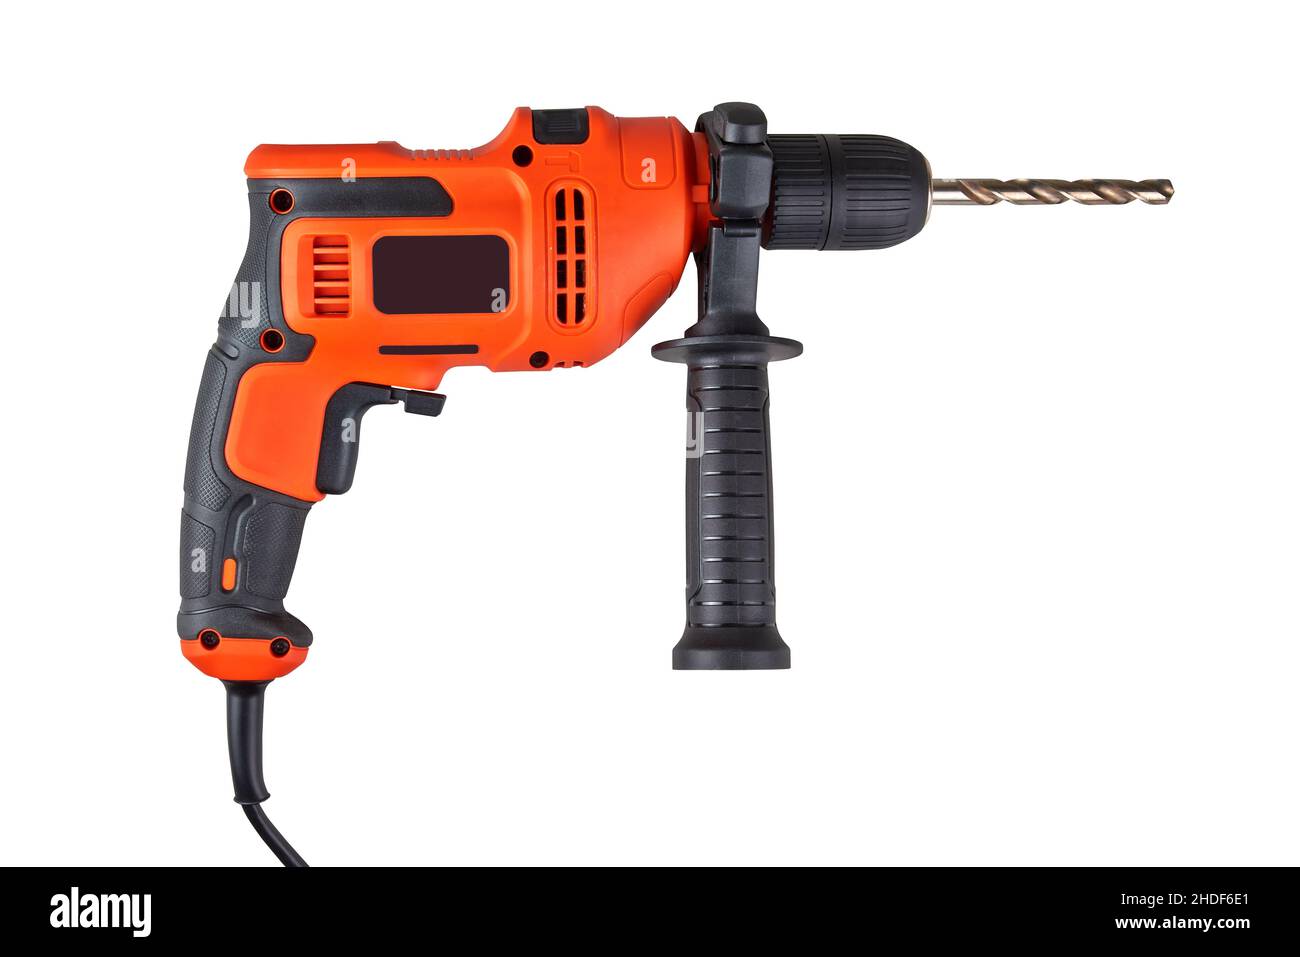 https://c8.alamy.com/comp/2HDF6E1/orange-electric-drill-with-cable-isolated-on-white-with-clipping-path-2HDF6E1.jpg